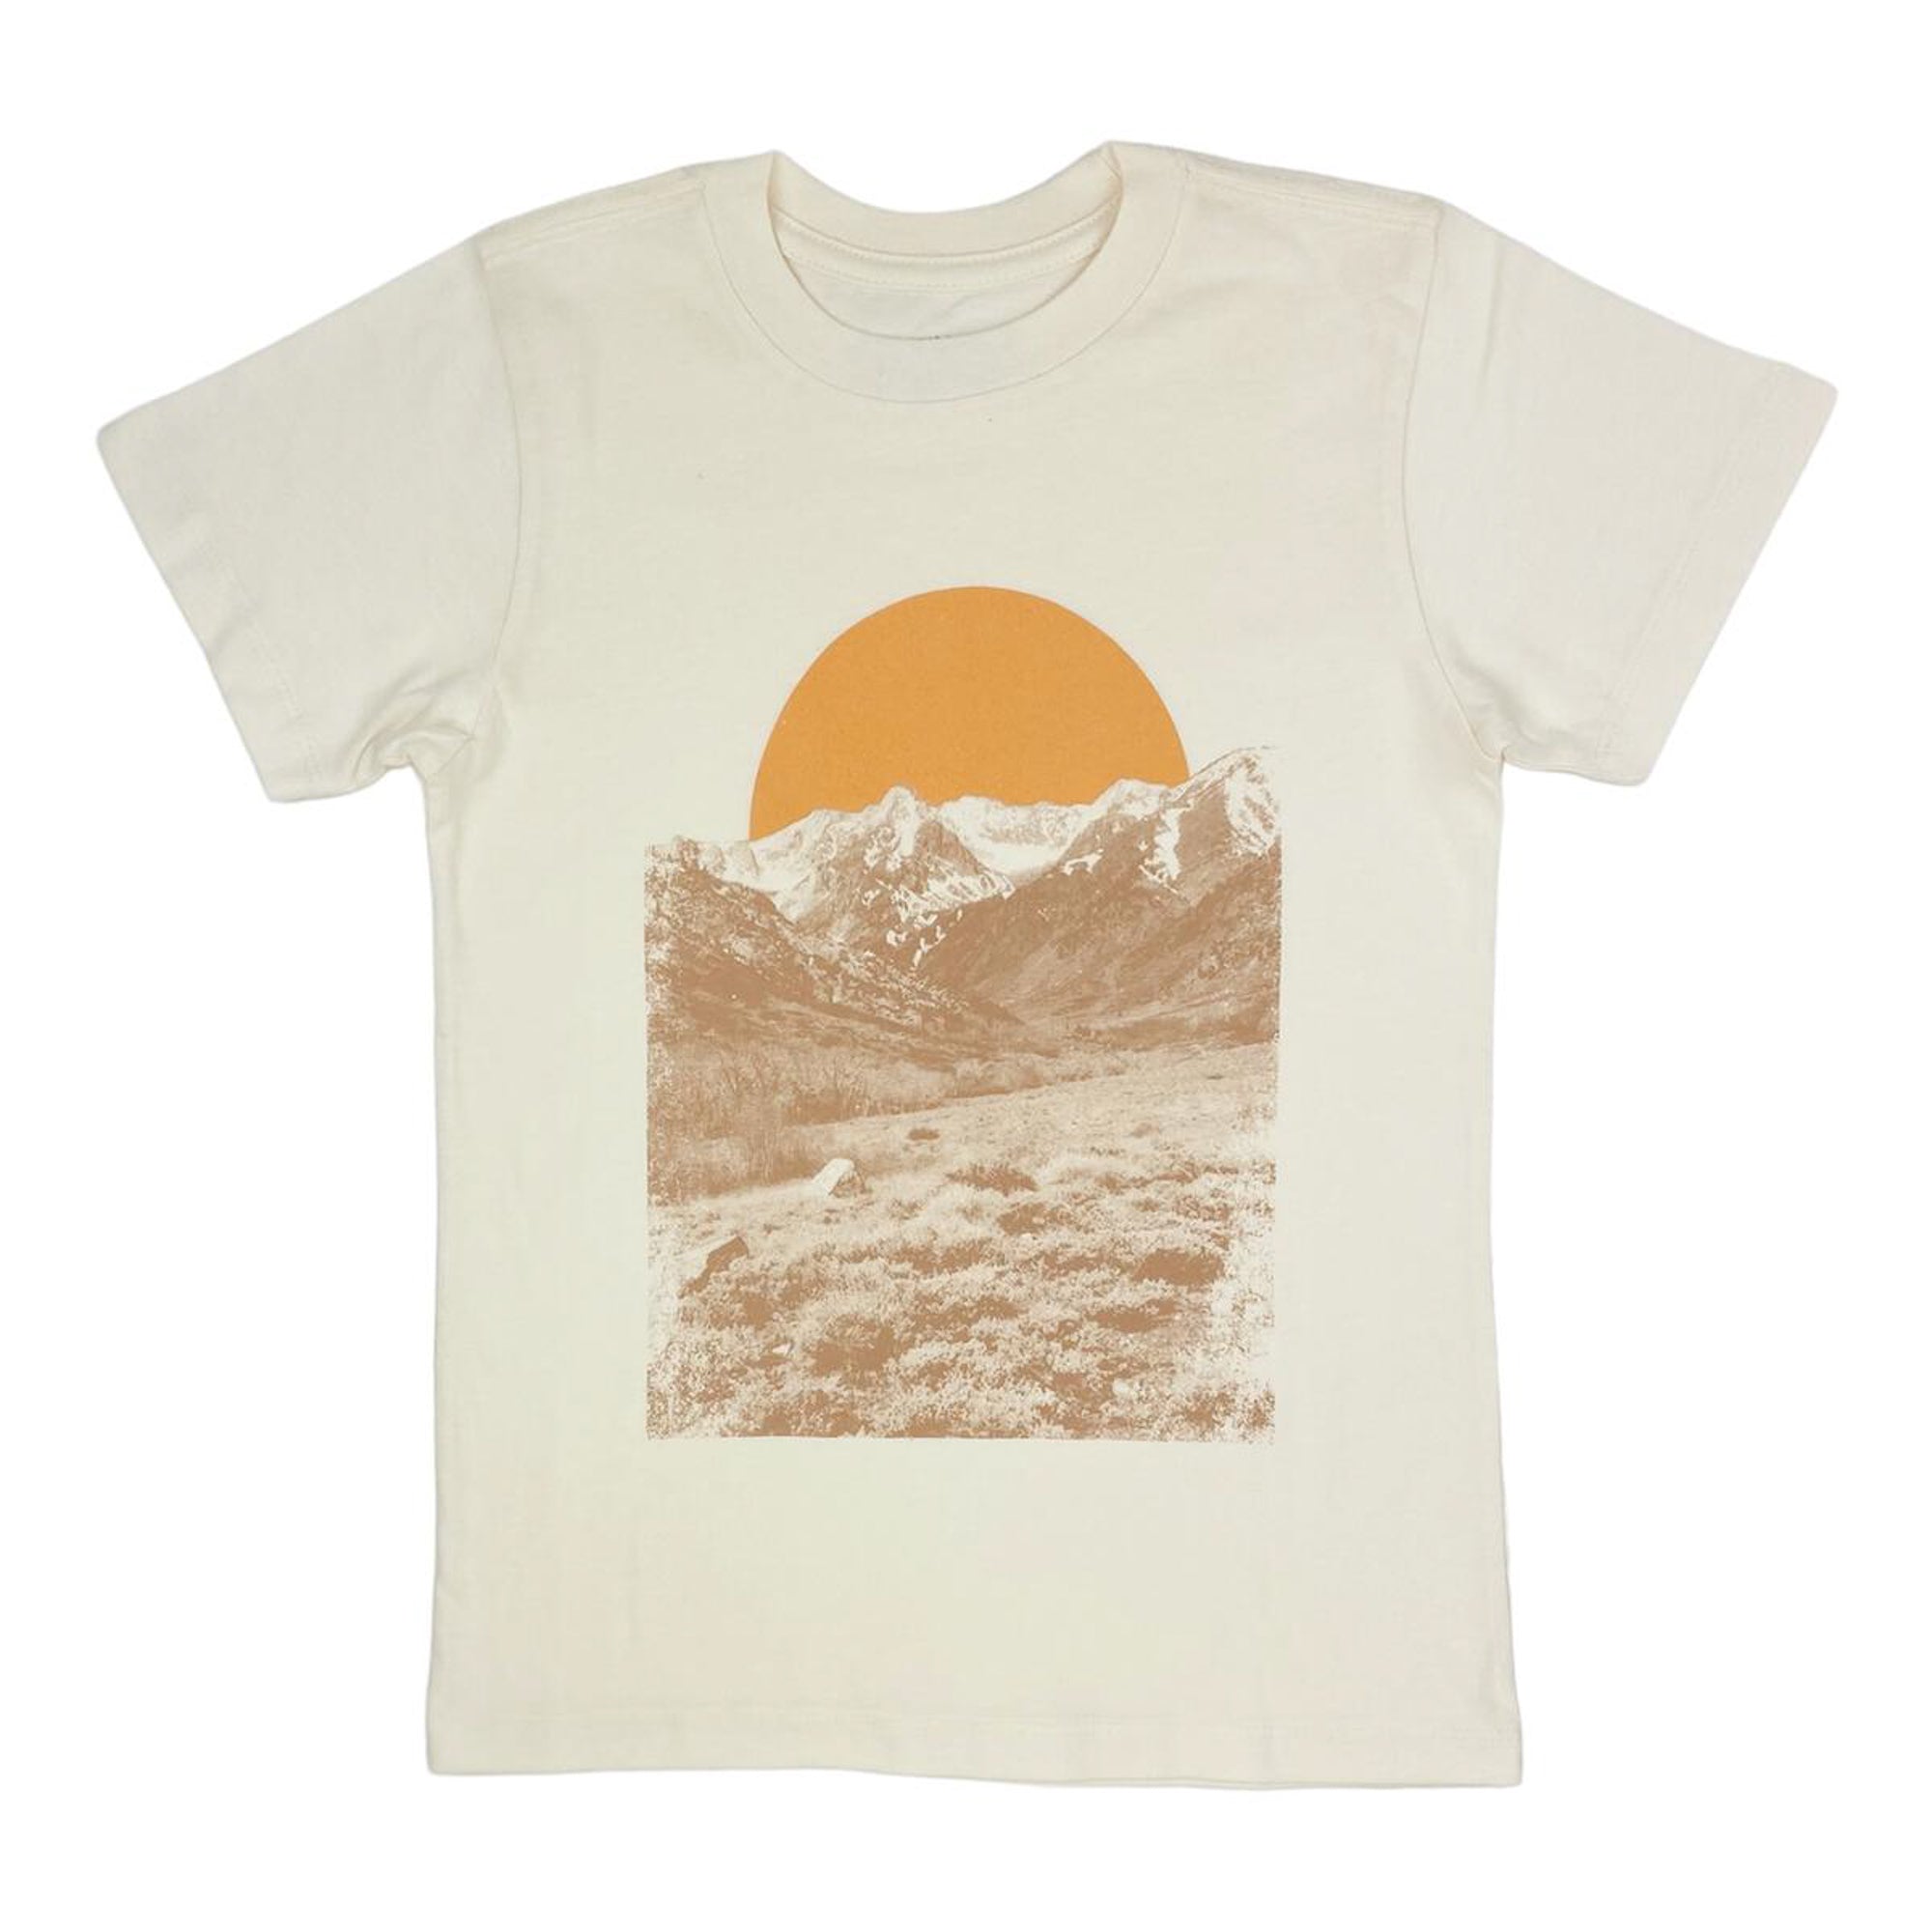 Tiny Whales_Mountains Calling Tee_Tops